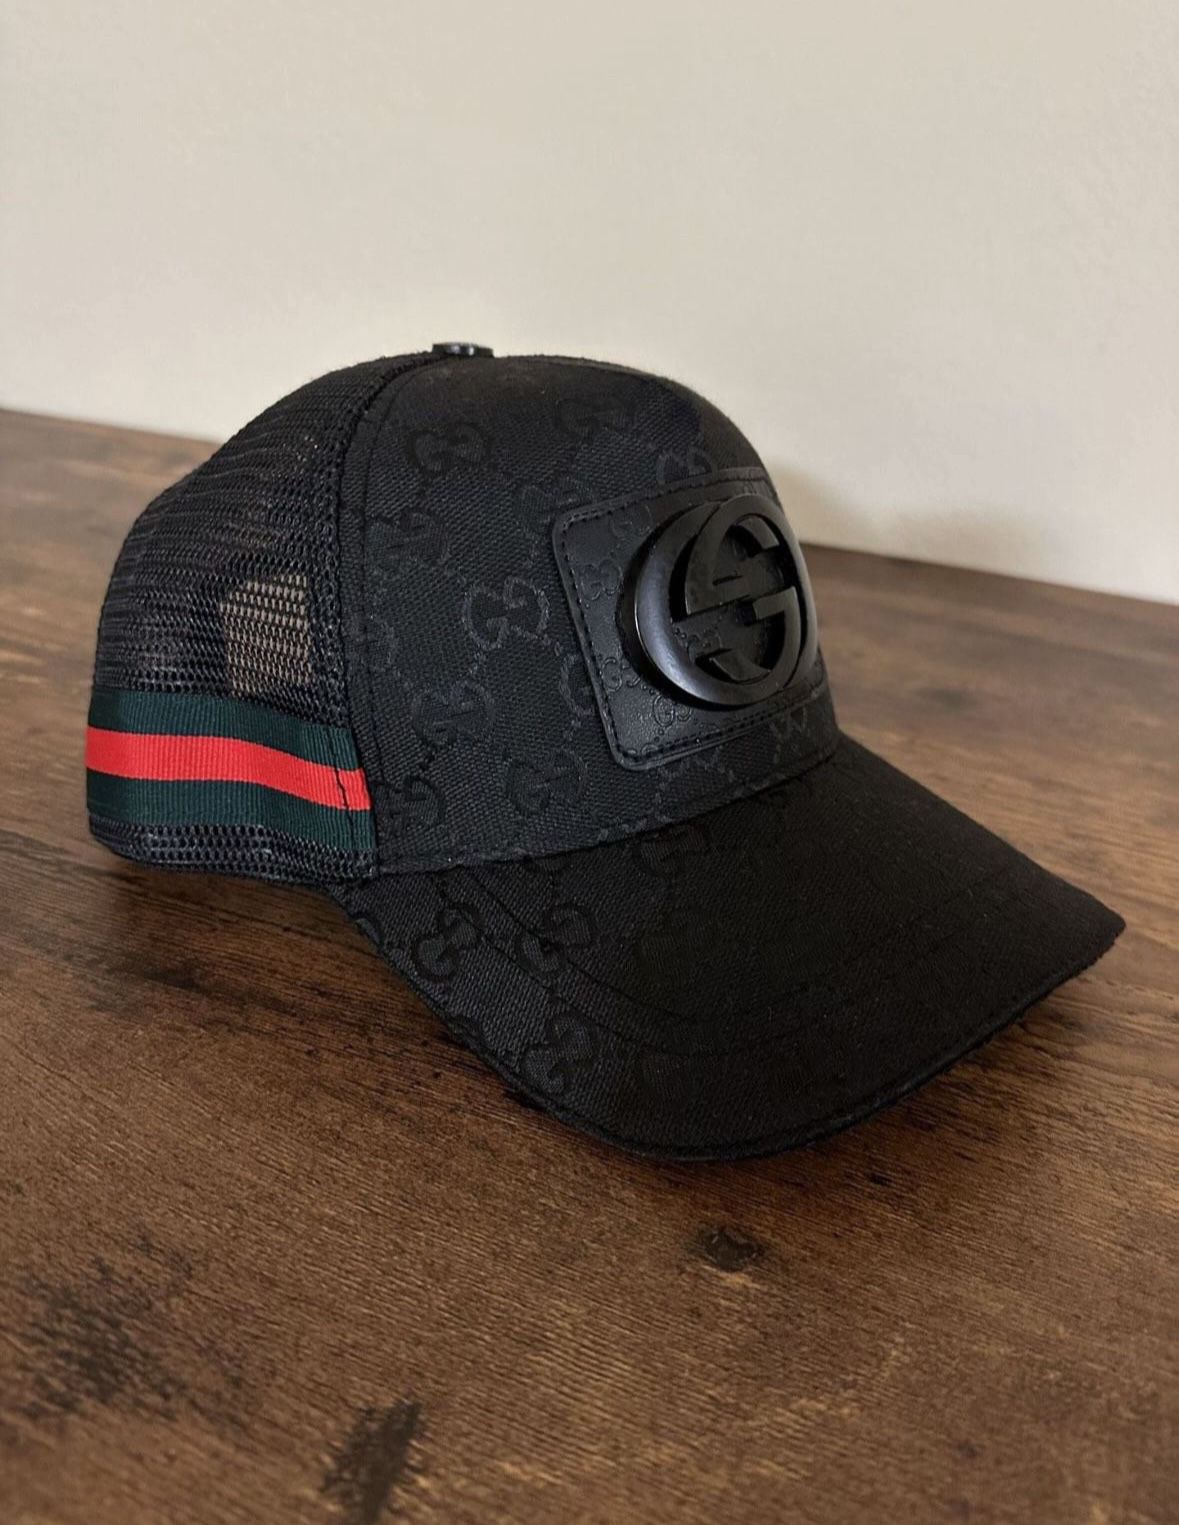 Gucci Snapback Hat - In Great Condition